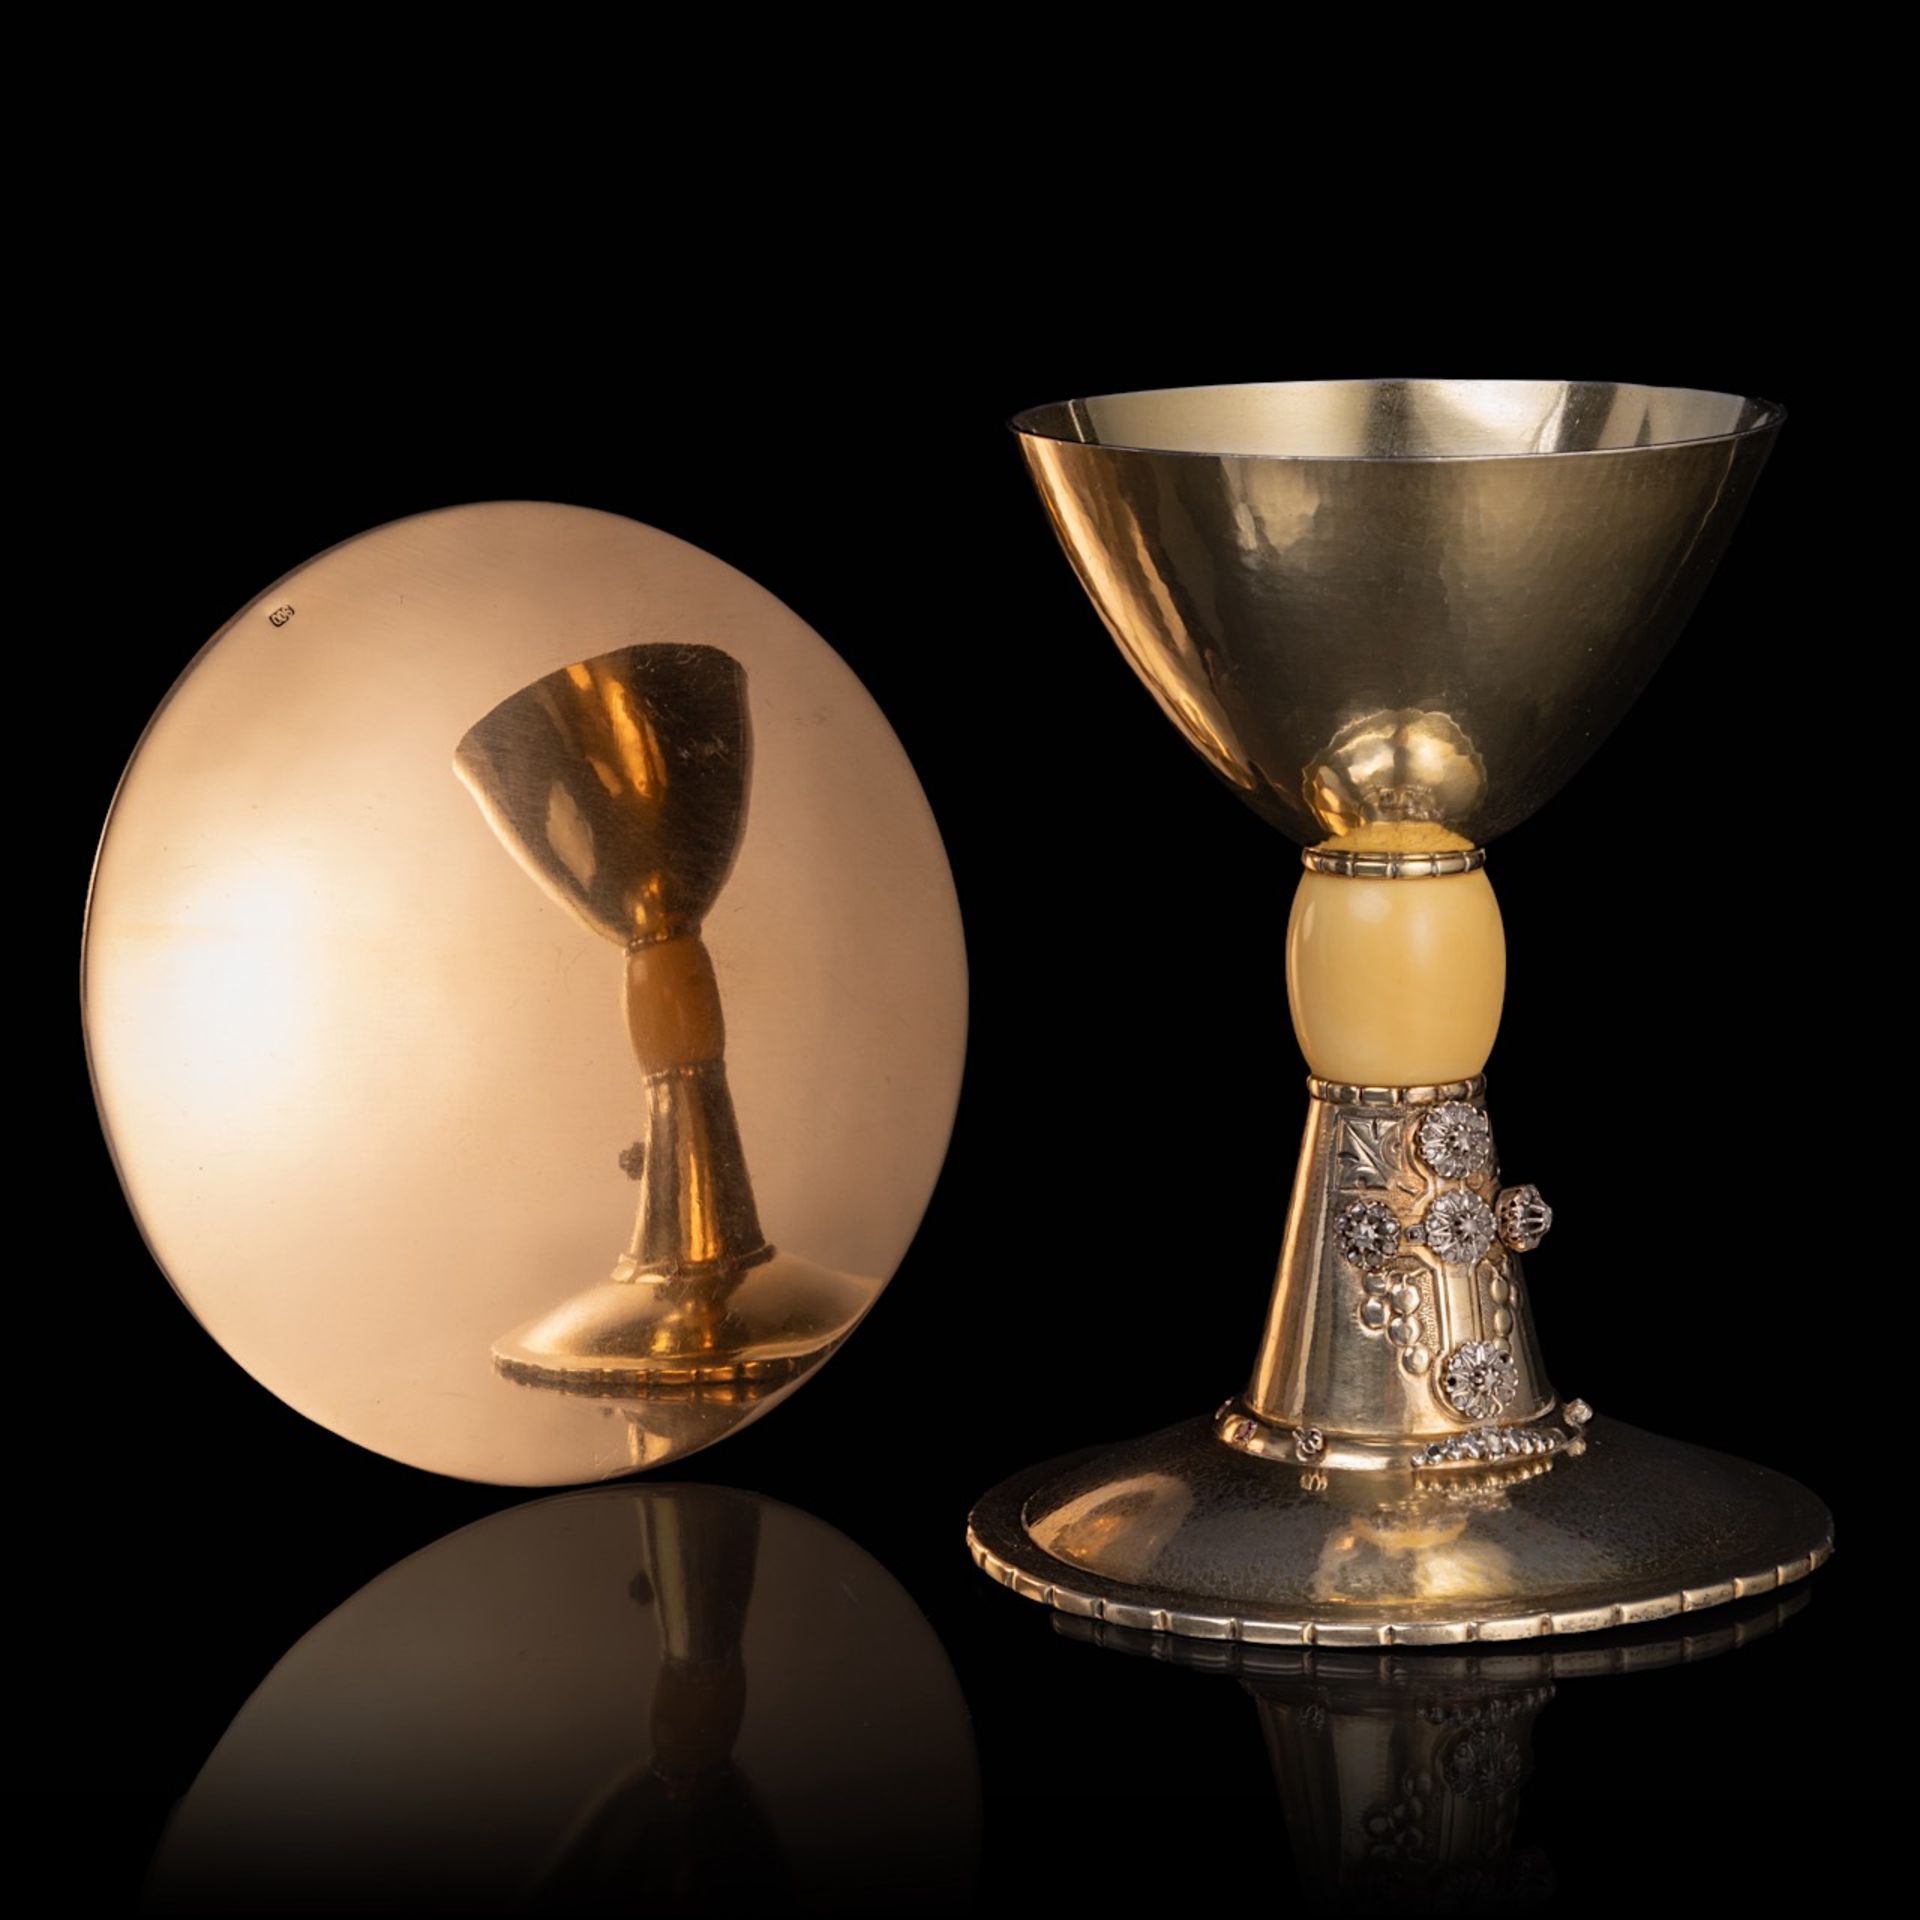 A 900/000 silver and gilt silver chalice, Belgian hallmarked, H 16 cm - total weight 518 g (+)